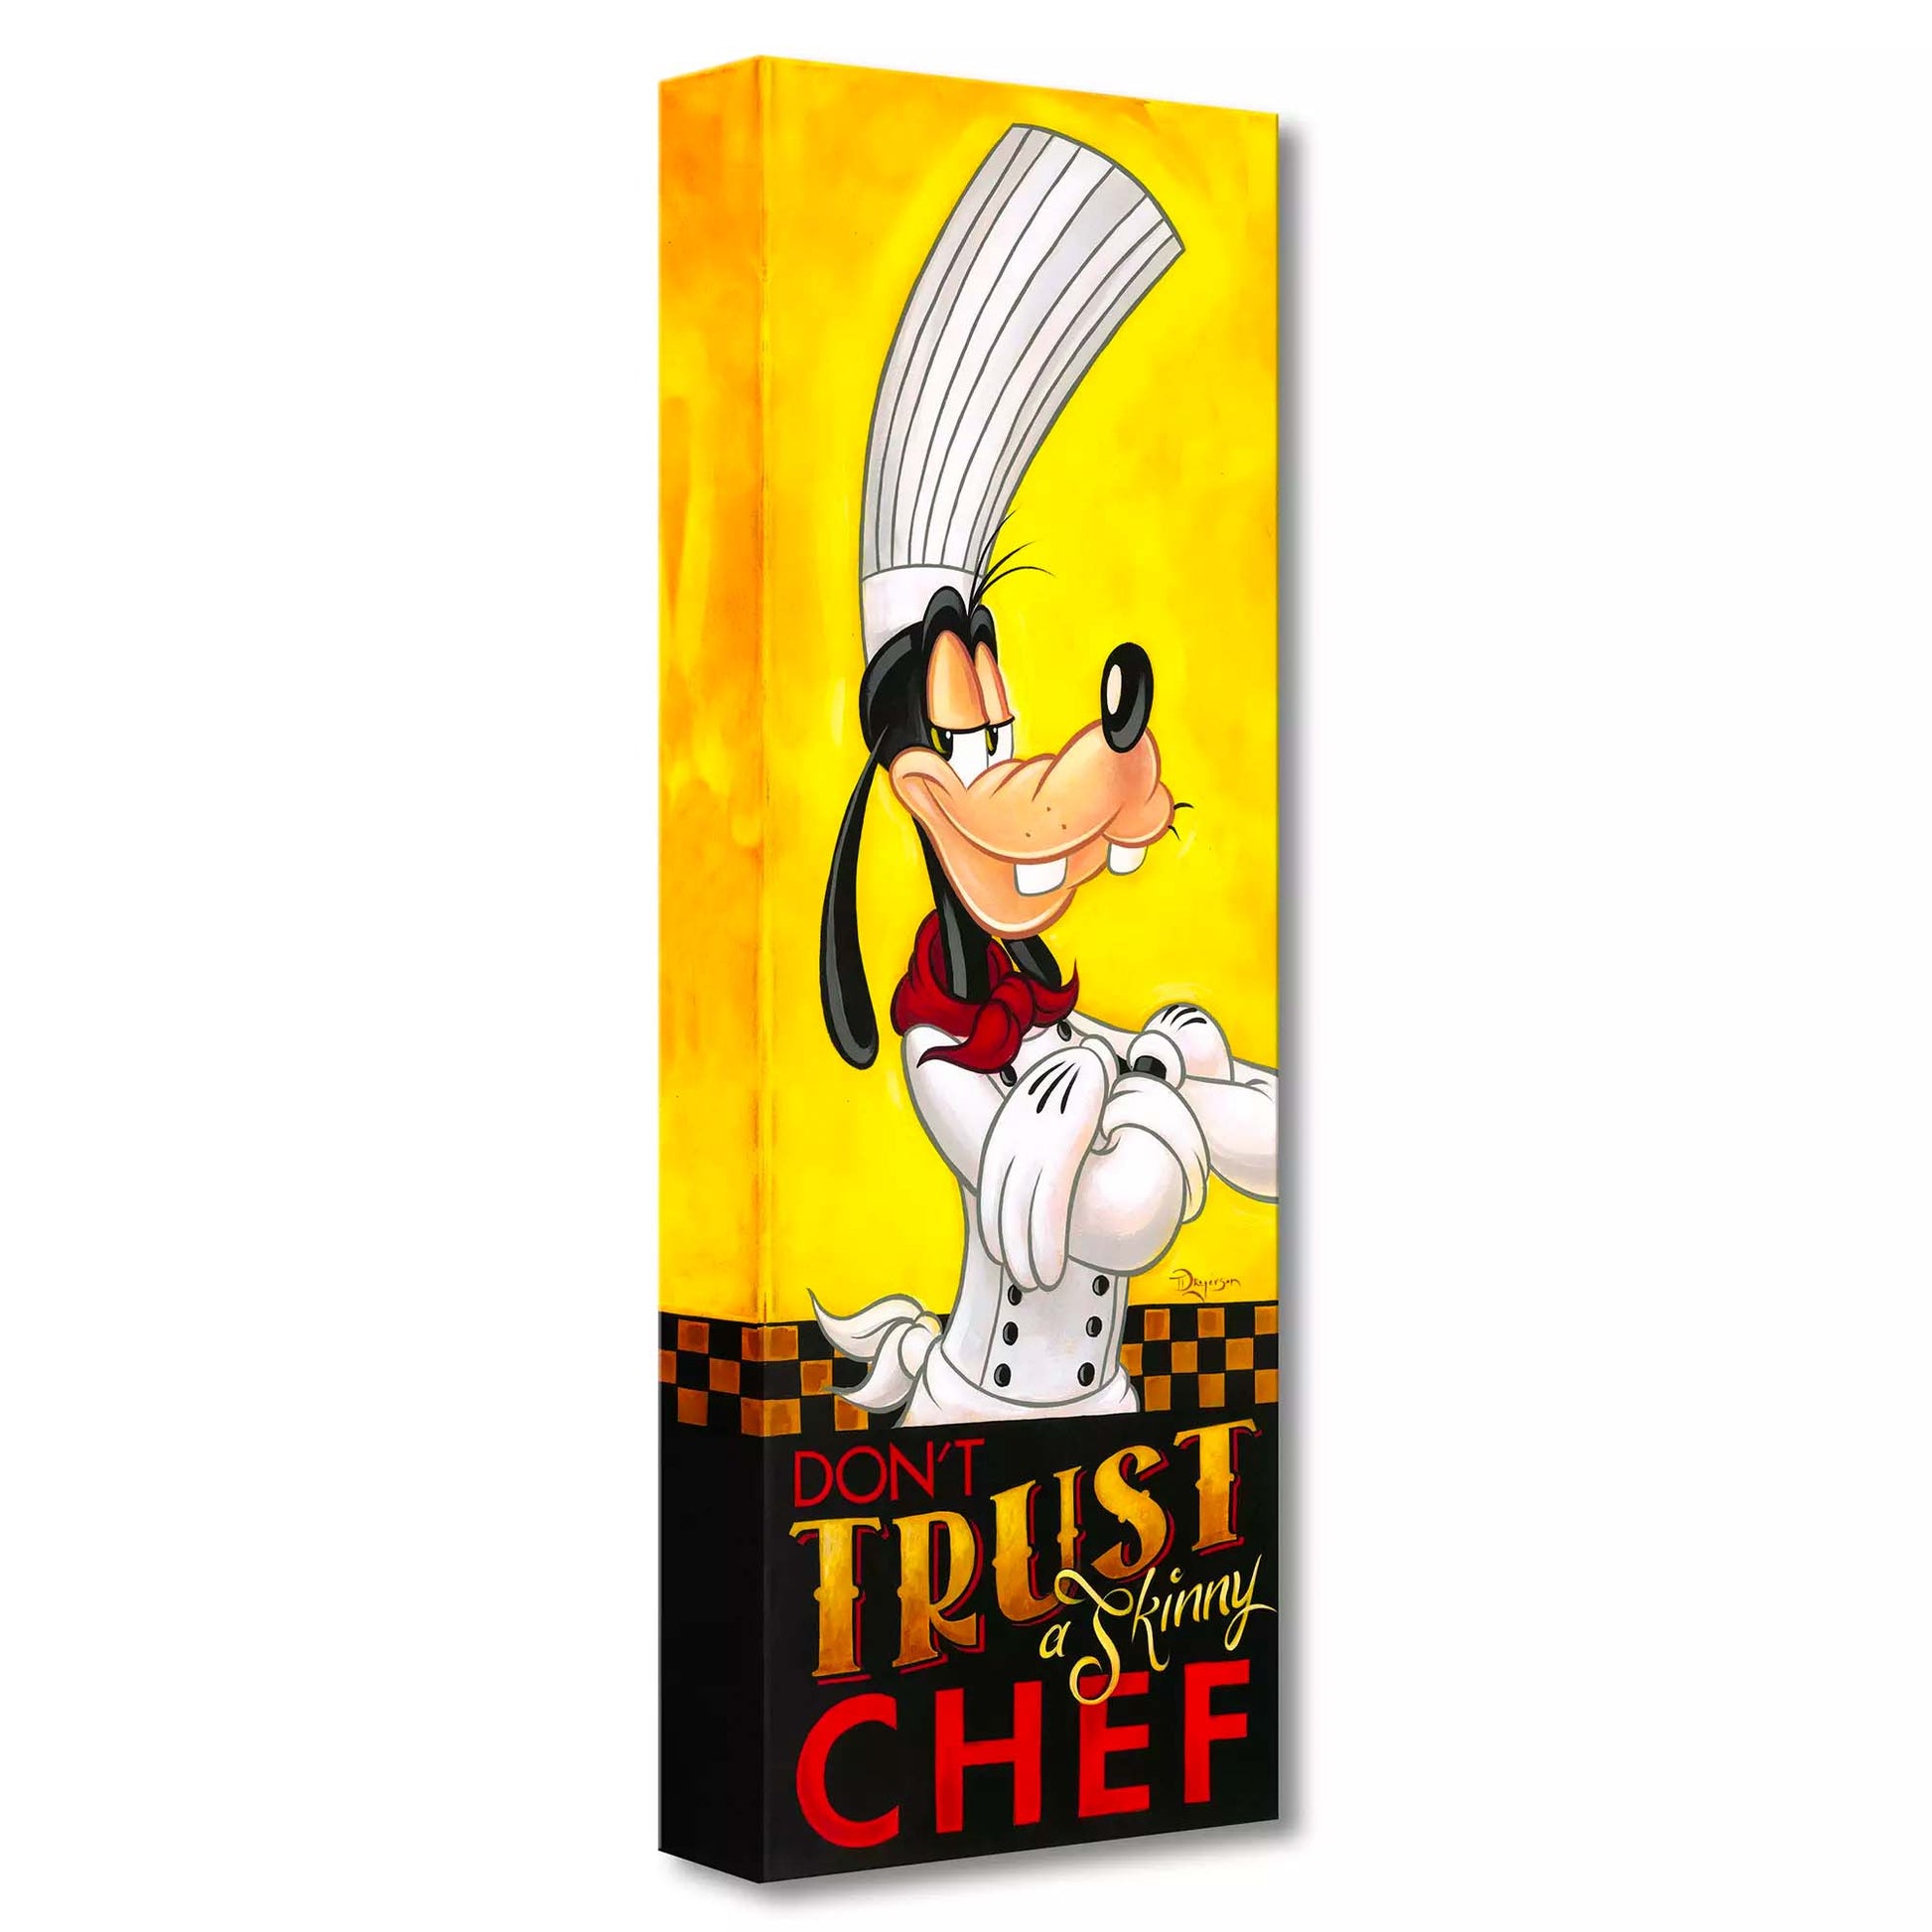 Tim Rogerson Disney "Don't Trust a Skinny Chef" Limited Edition Canvas Giclee